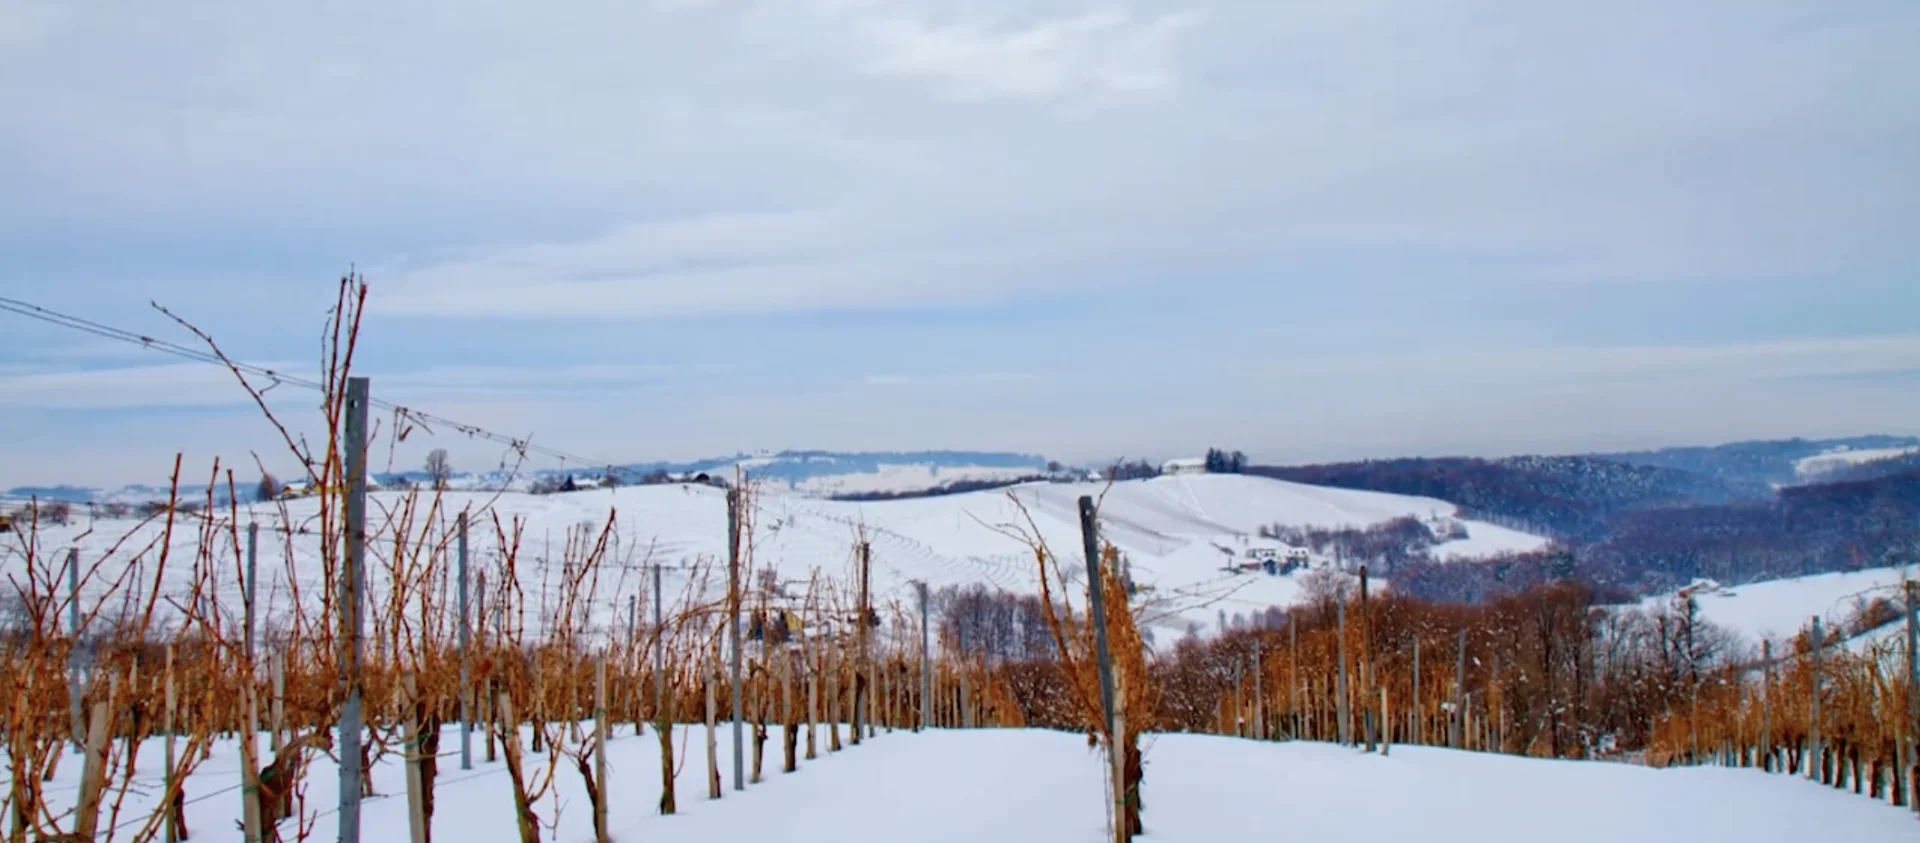 Cold snap causes catastrophic loss for B.C. wine industry: report